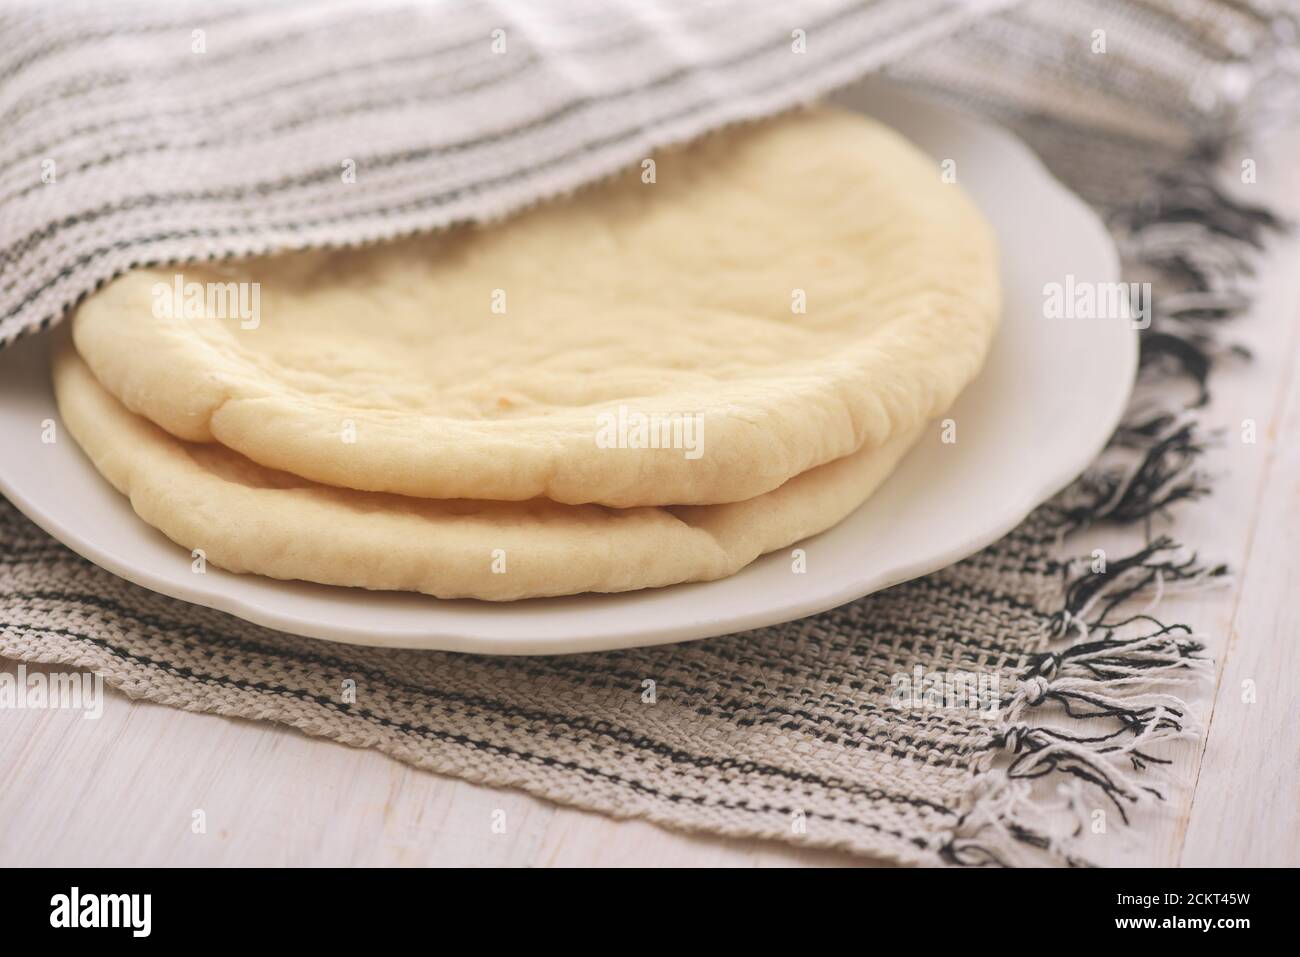 Closeup of uncooked flatbread on plate Stock Photo